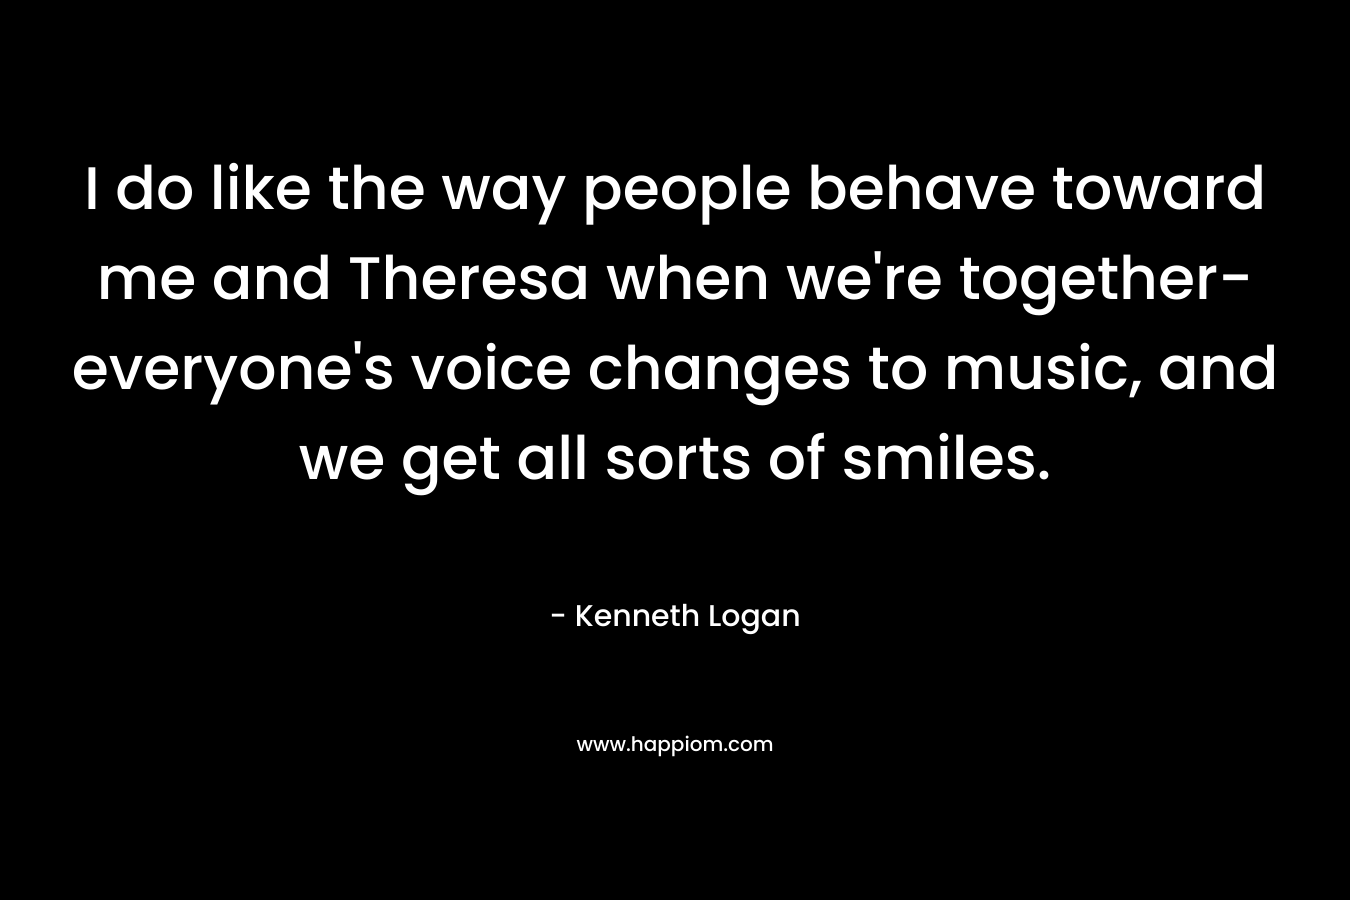 I do like the way people behave toward me and Theresa when we're together-everyone's voice changes to music, and we get all sorts of smiles.